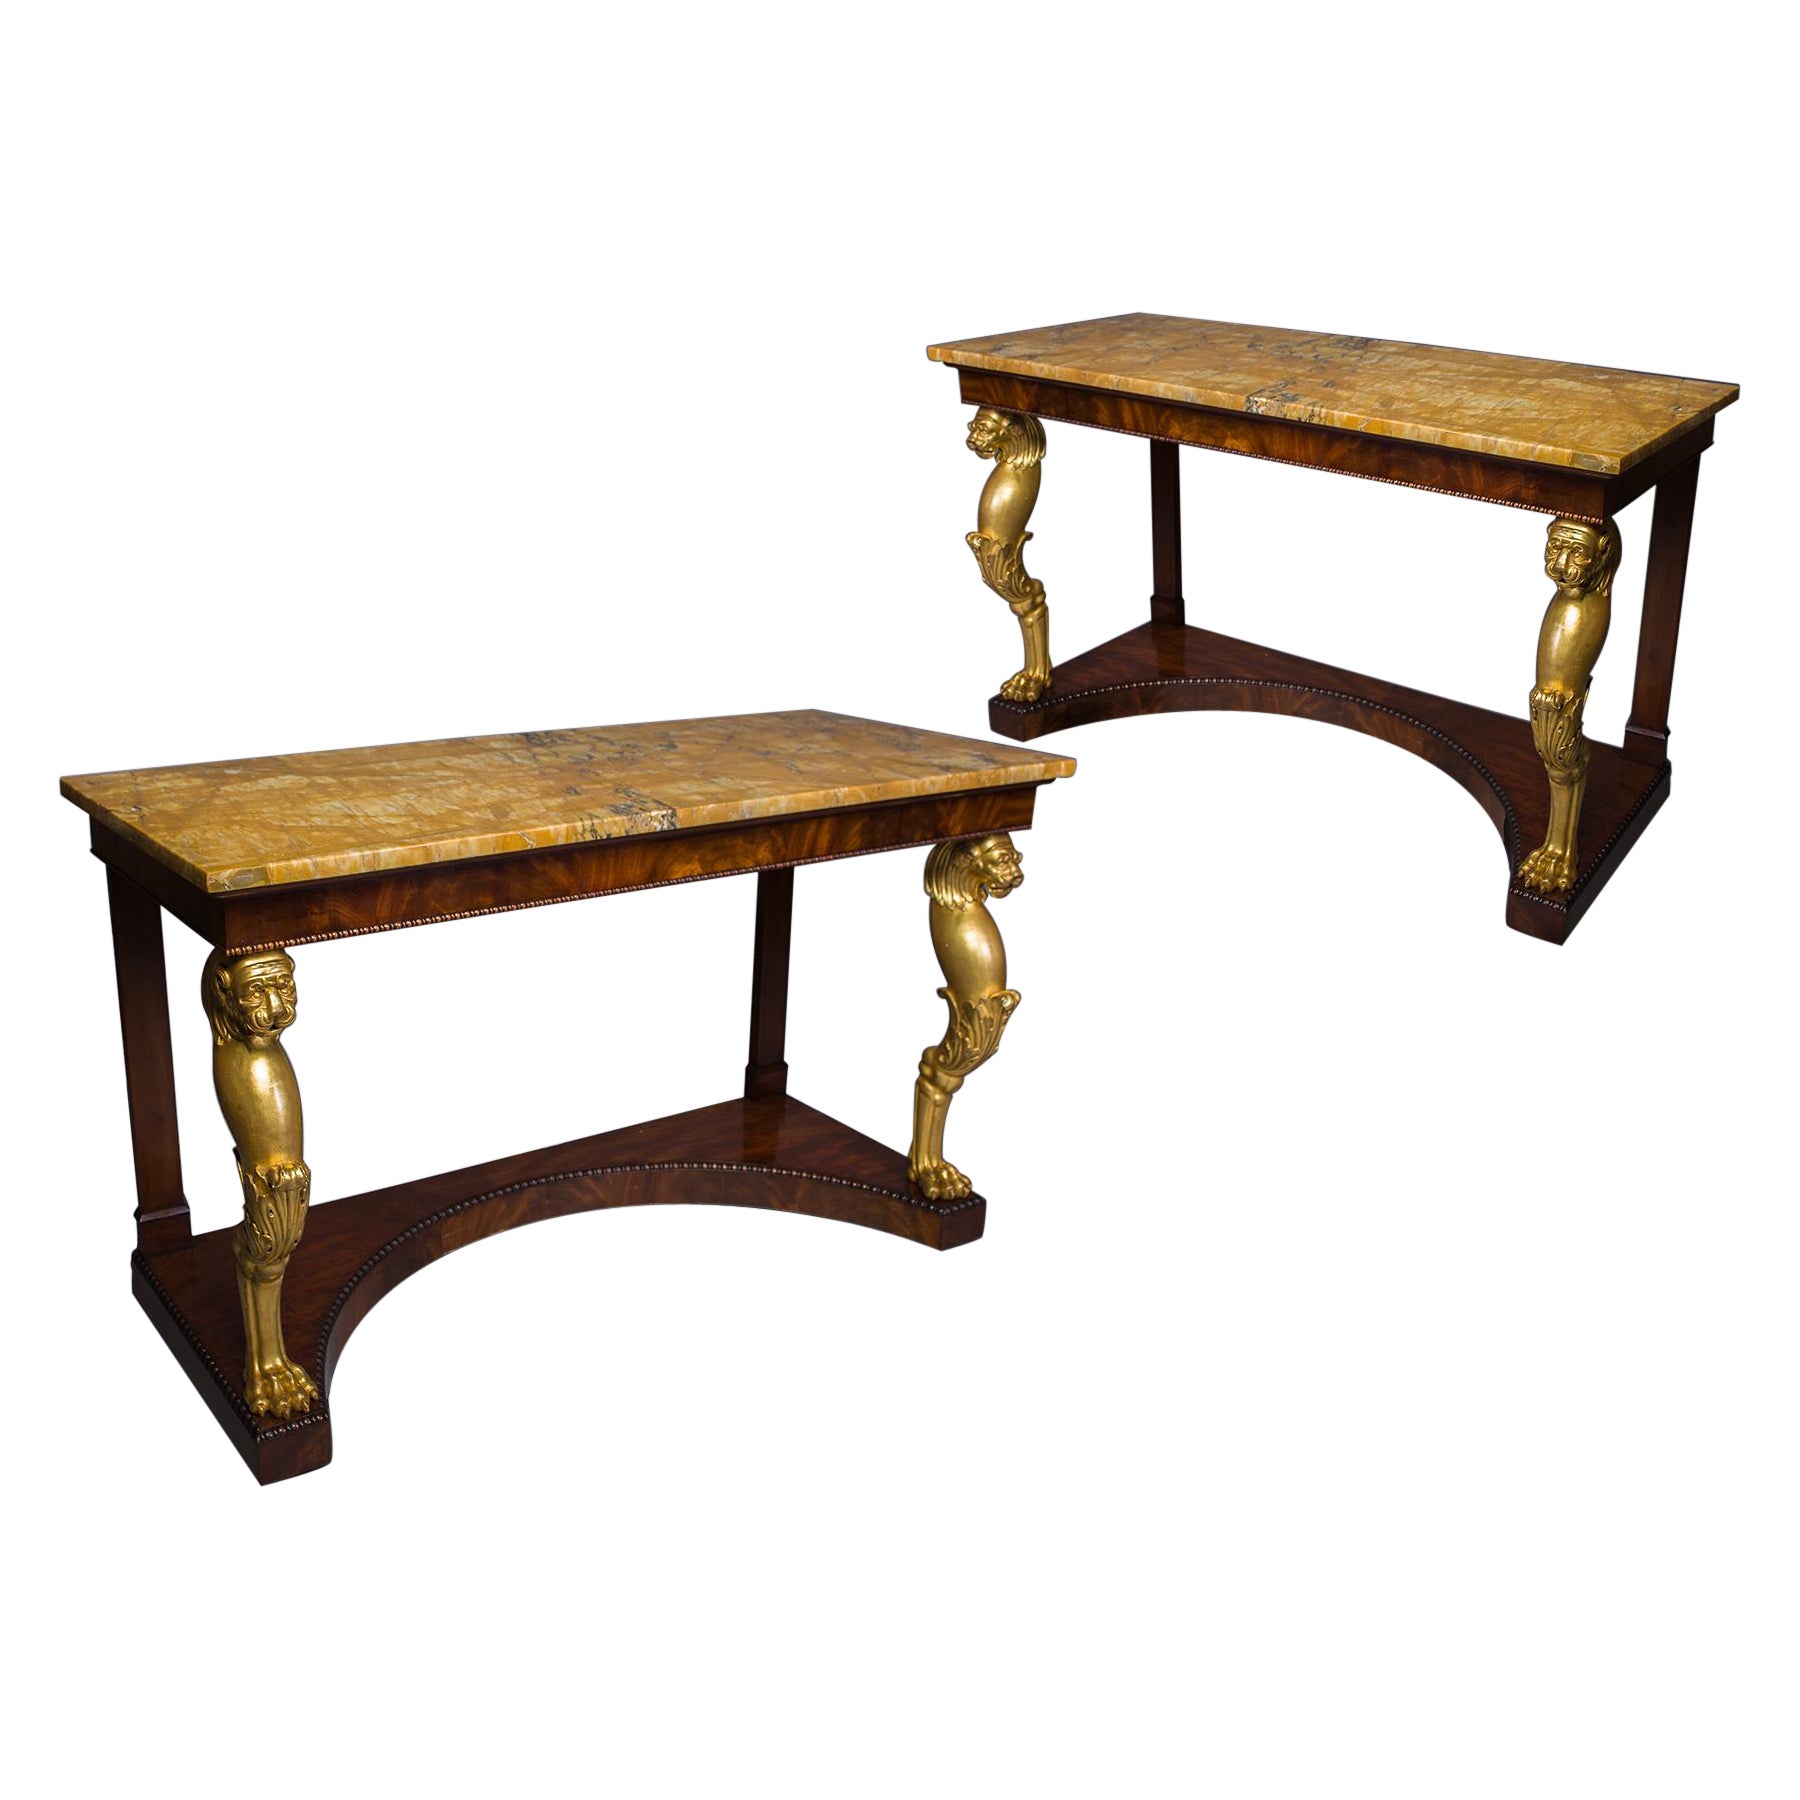 Pair of Regency Giltwood and Mahogany Console Tables